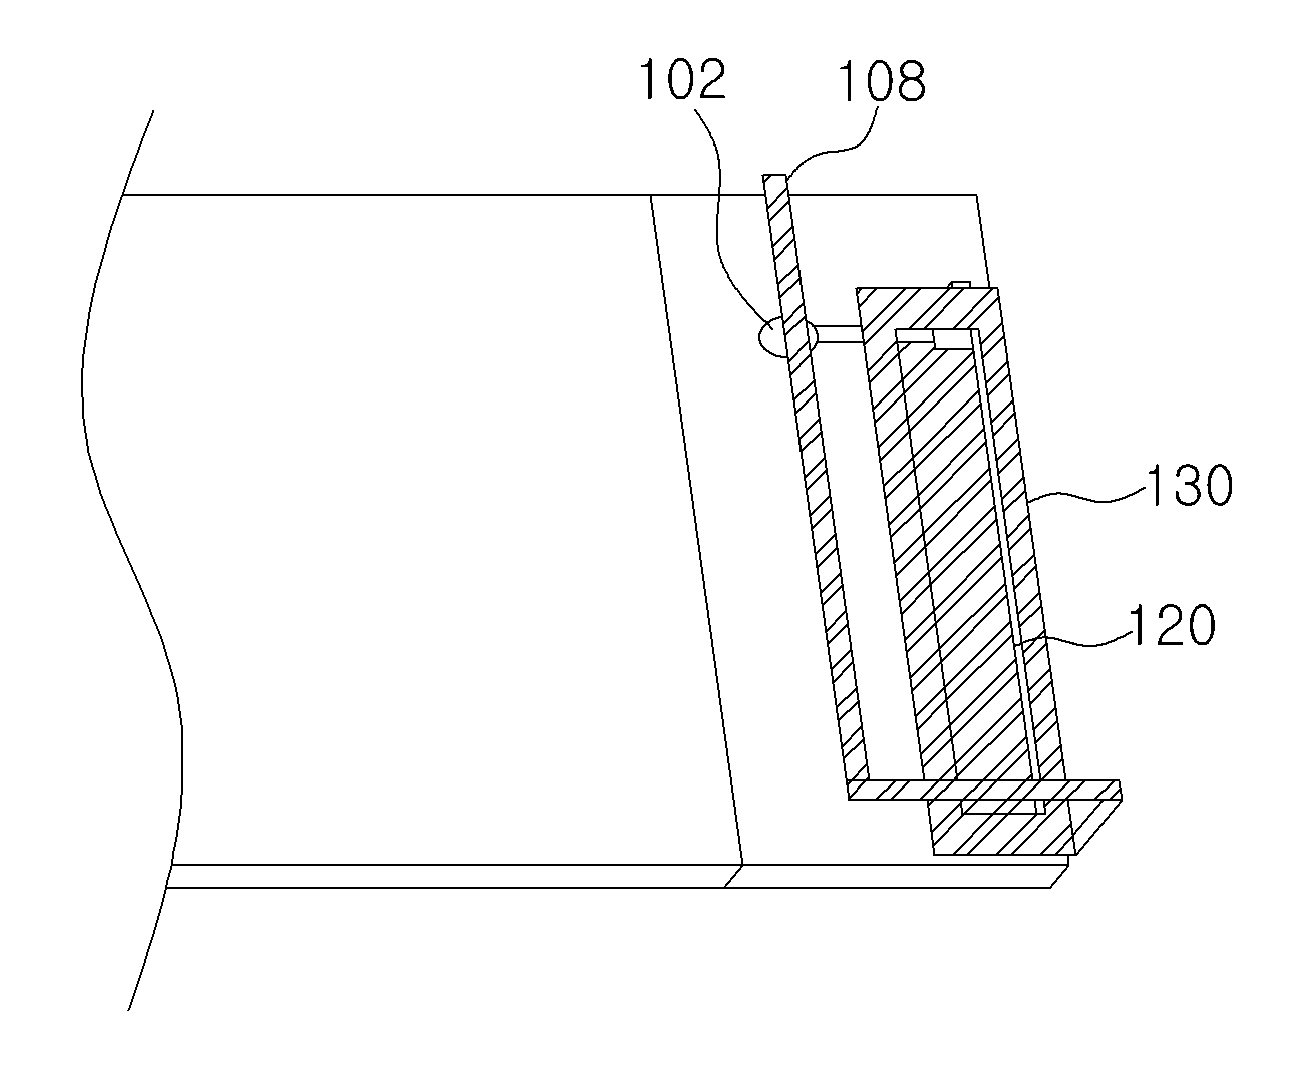 Built-in antenna which supports broadband impedance matching and has feeding patch coupled to substrate